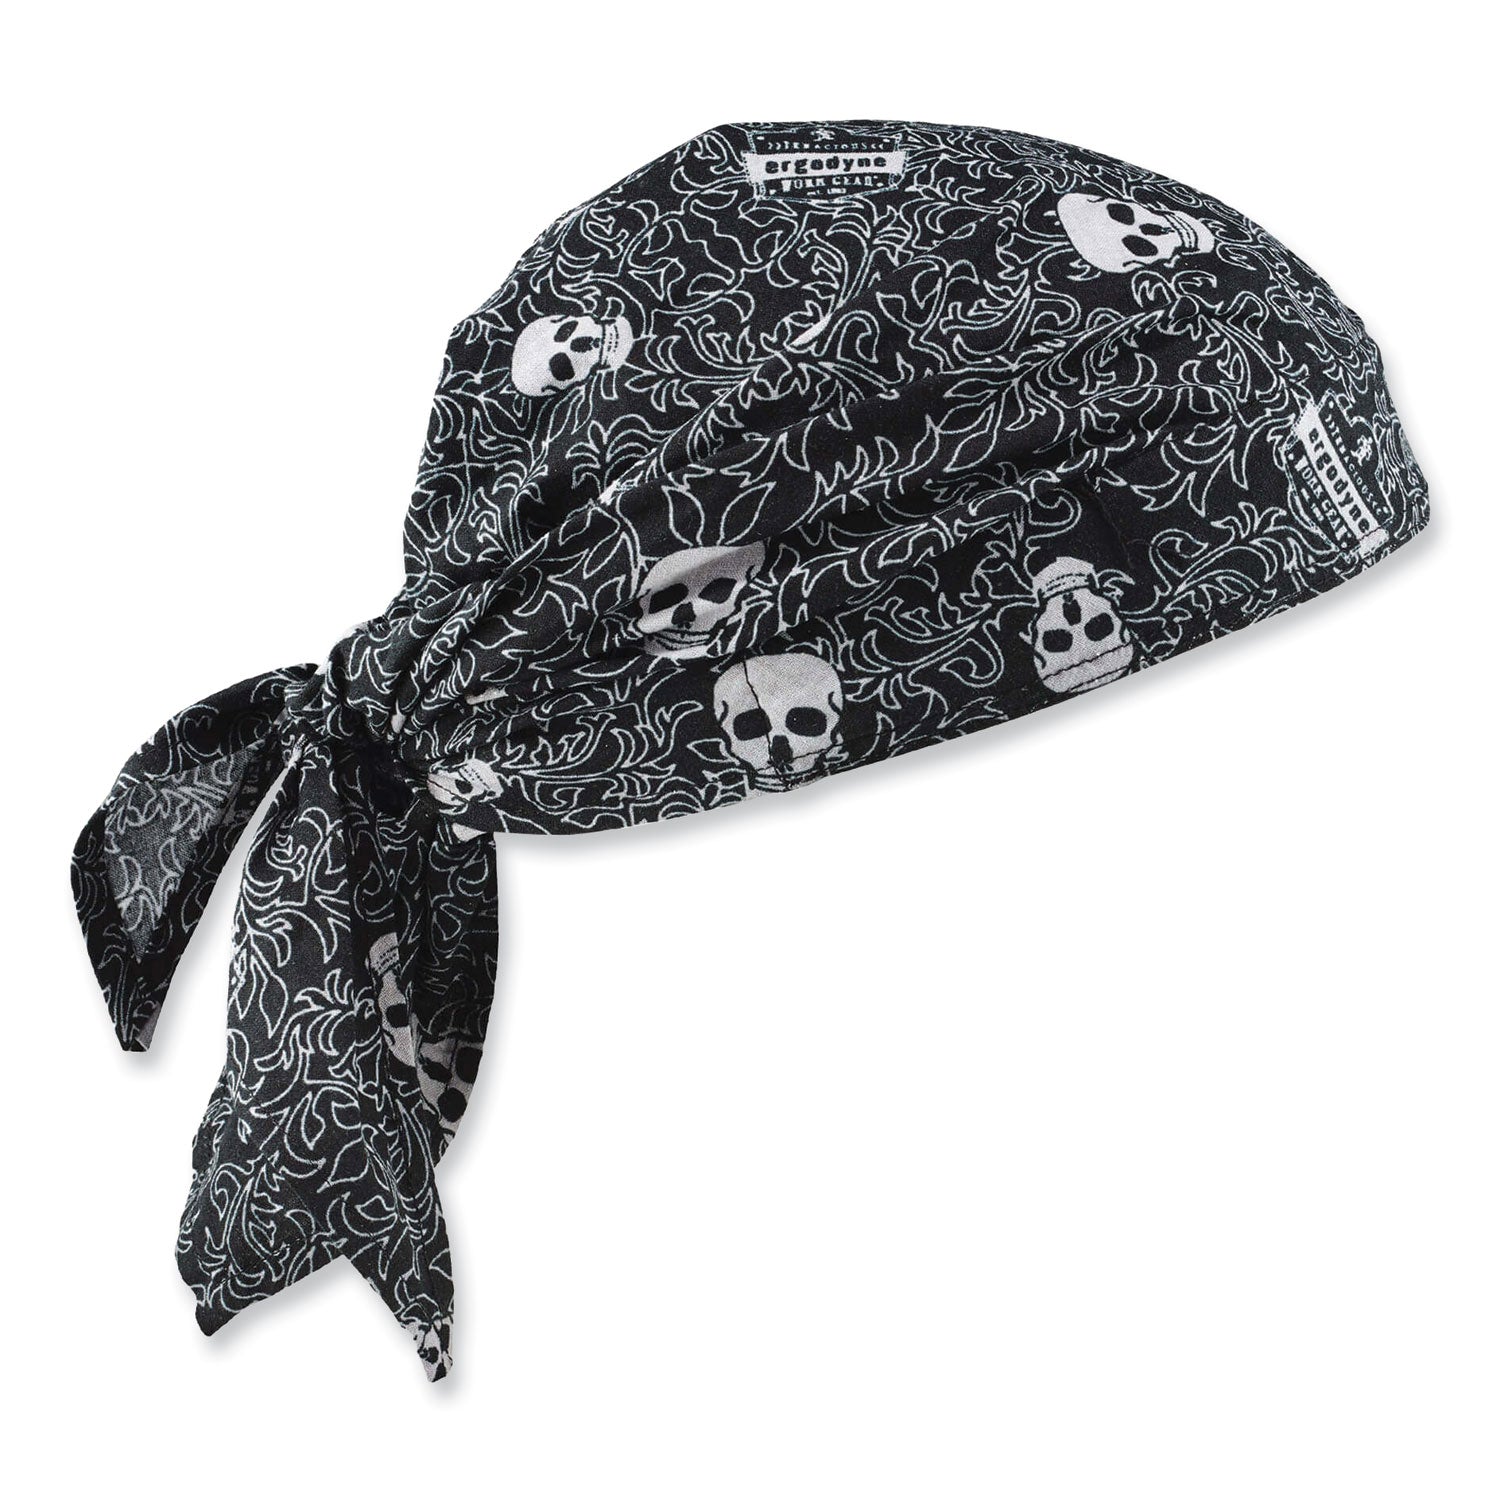 chill-its-6710ct-cooling-pva-tie-bandana-triangle-hat-one-size-fits-most-skulls-ships-in-1-3-business-days_ego12589 - 1